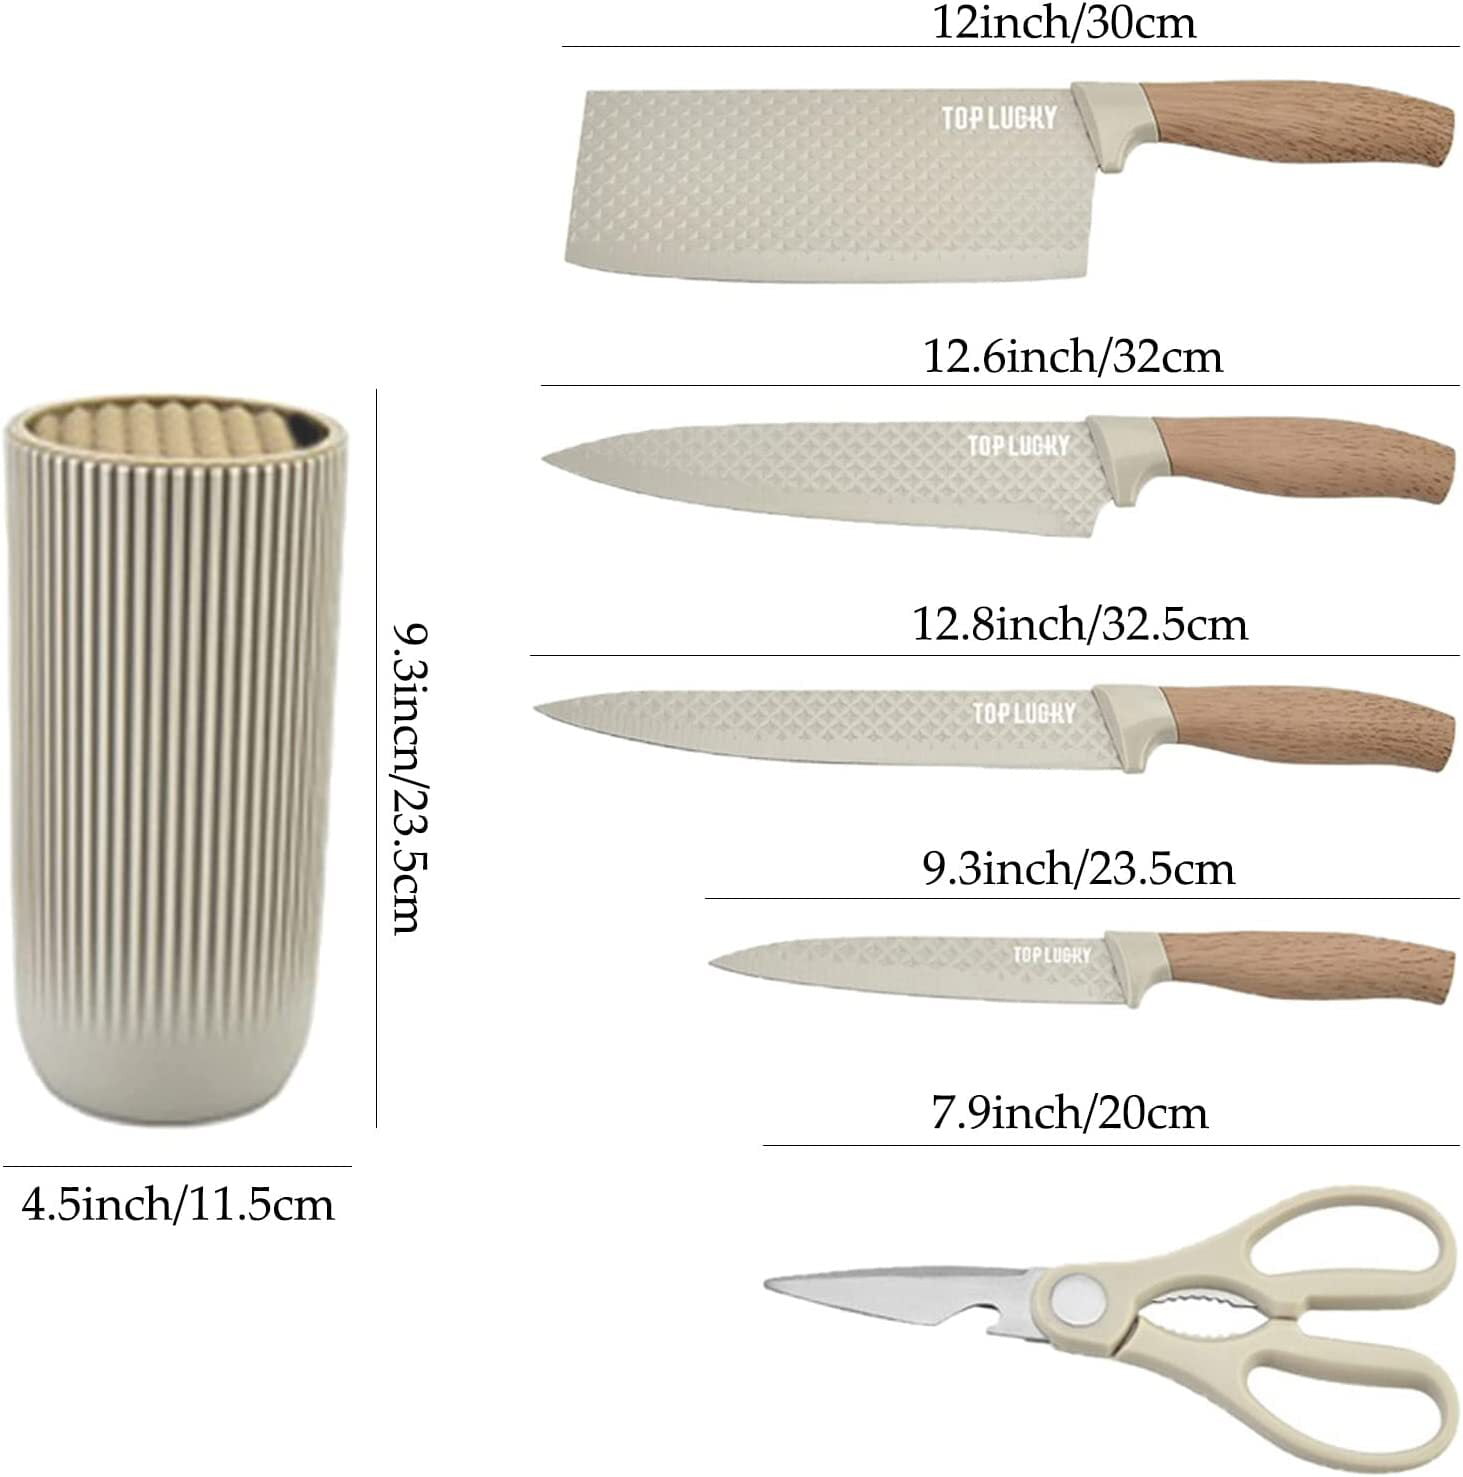  Knife Set, 6-Piece Khaki Professional Kitchen Knife Set for  Chef, Super Sharp Meat Knives Cooking Knives Sets, Anti-Rust Stainless  Steel Kitchen Knives with Cutlery Ergonomic Design Wood Handle: Home &  Kitchen